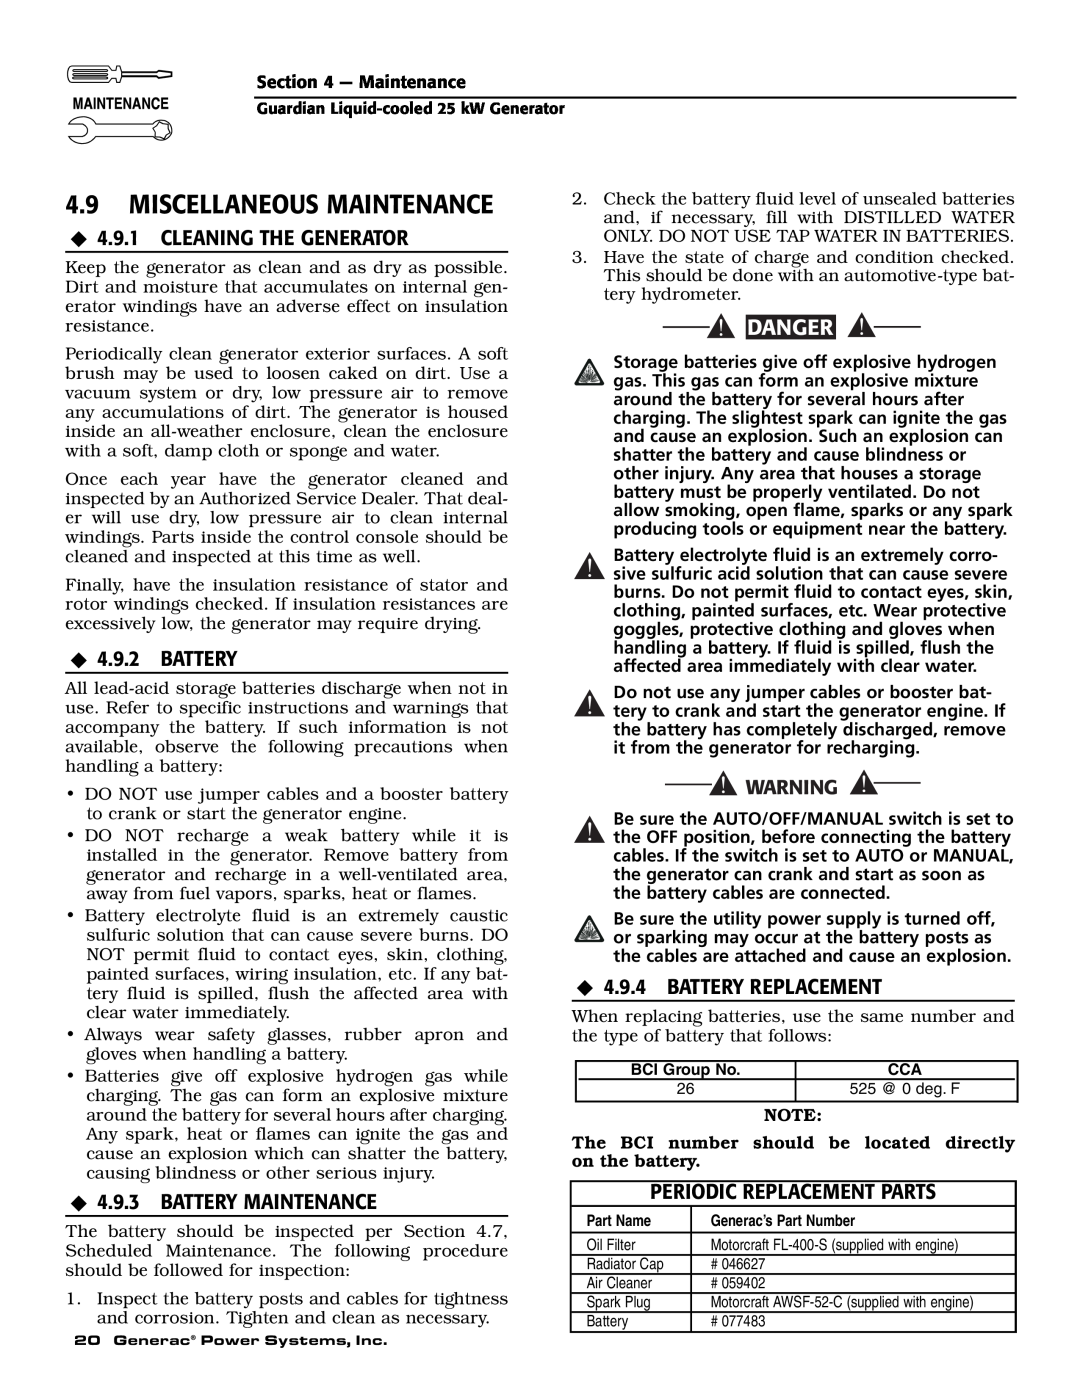 Generac Power Systems 005040-1 Miscellaneous Maintenance, ‹ 4.9.1 CLEANING THE GENERATOR, ‹ 4.9.2 BATTERY, Danger 